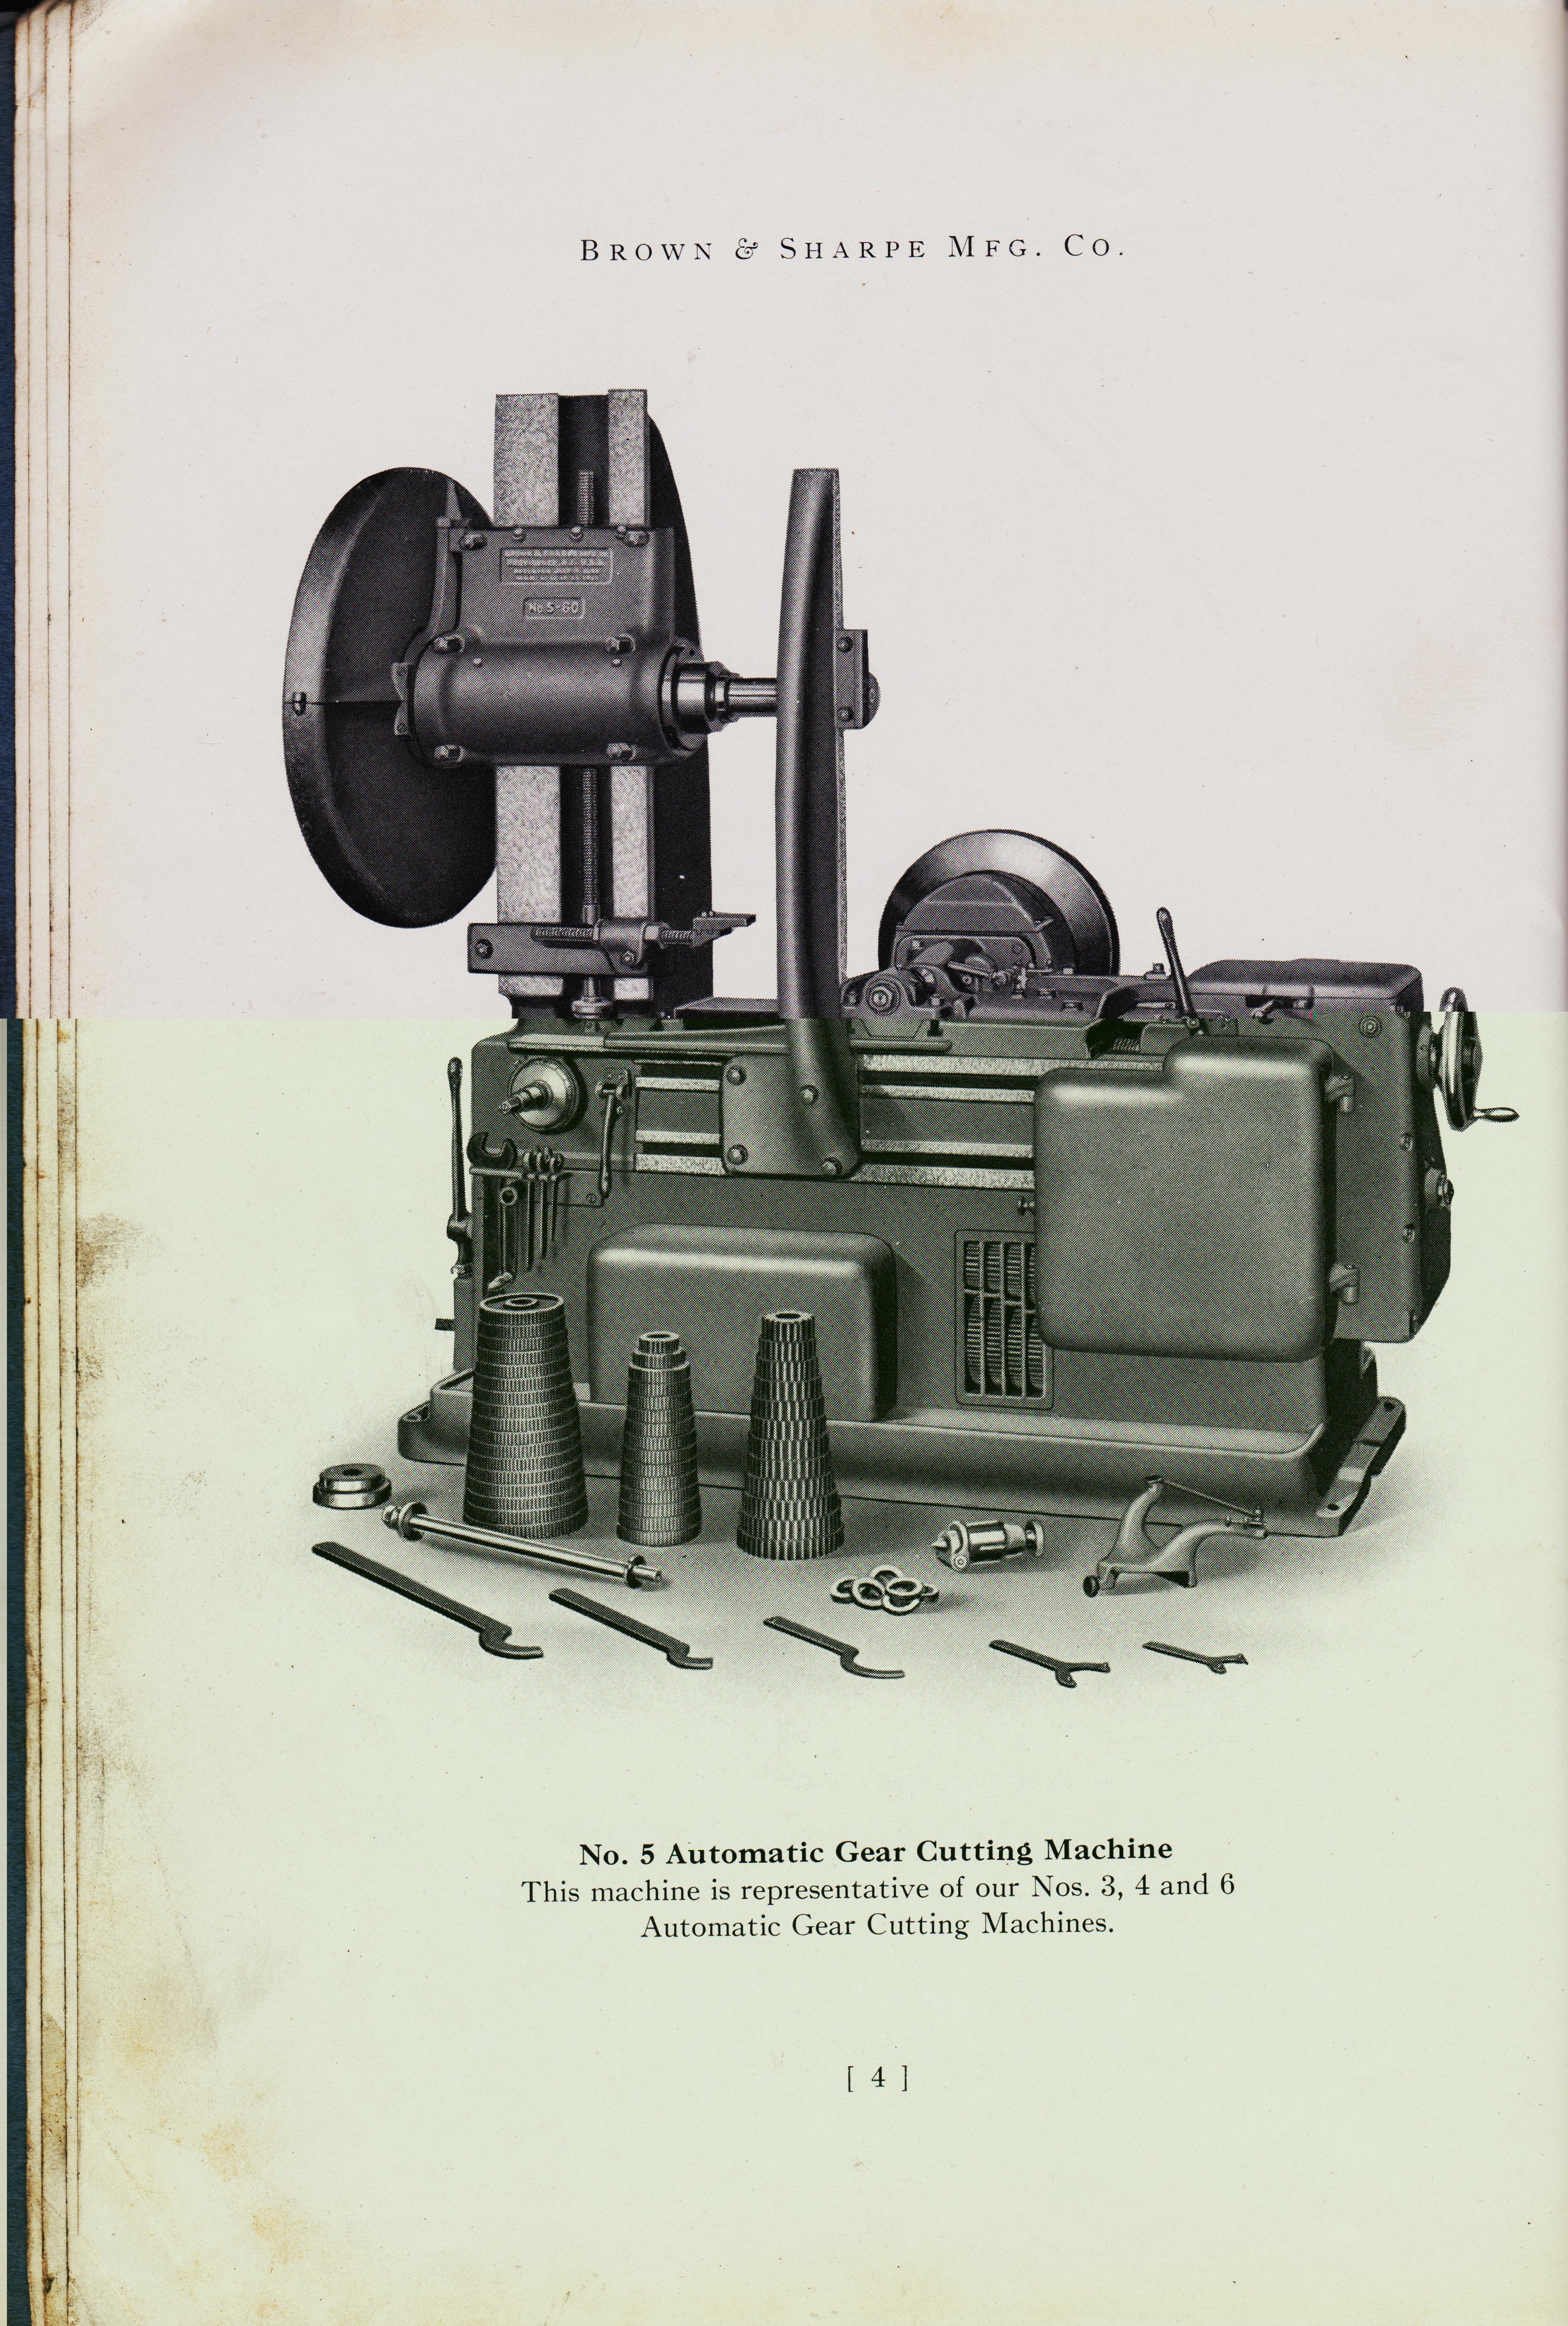  https://antiquemachinery.com/images-2020/Automatic-Gear-Cutting-Machines-Brown-and-Sharpe-Mfg-Co-1914-pg-1-Gear-Cutting-Machine-6.jpg